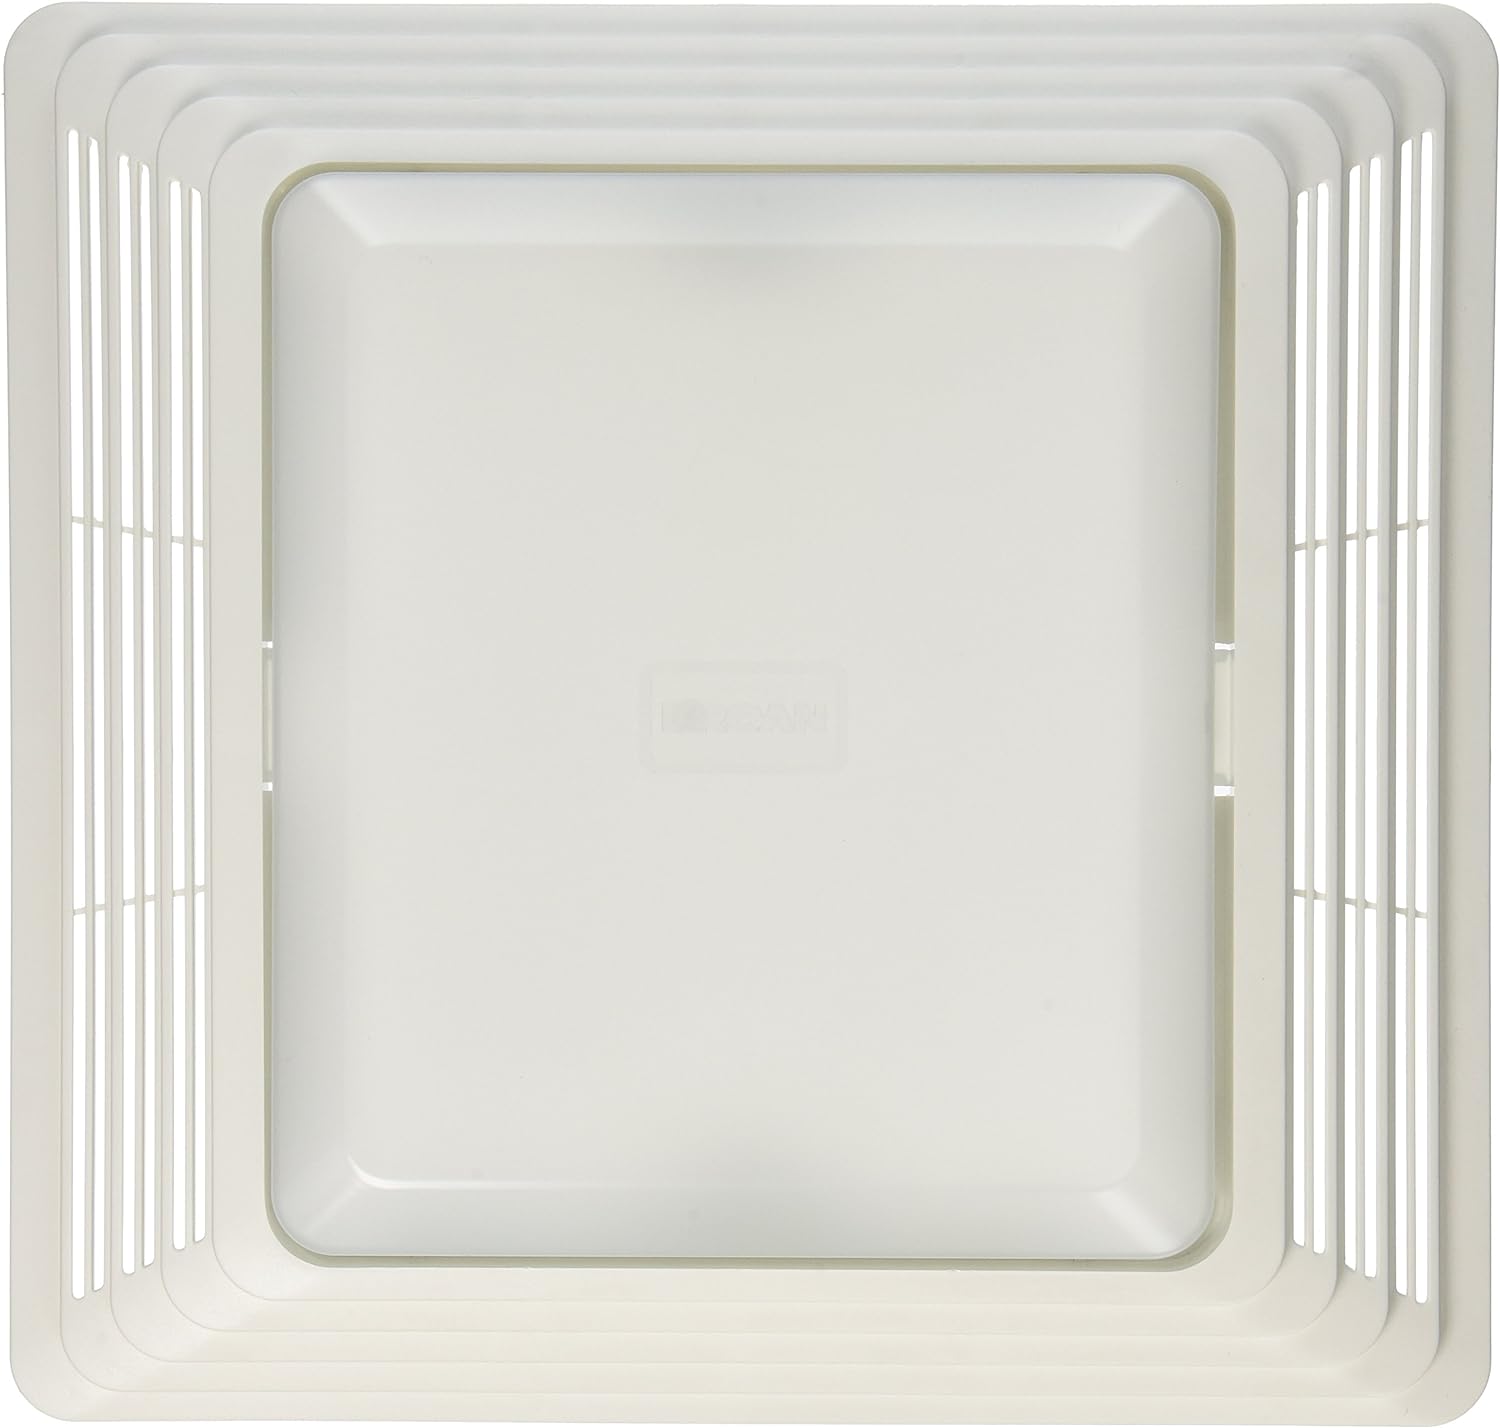 Broan S97014094 Bathroom Fan Cover Grille and Lens